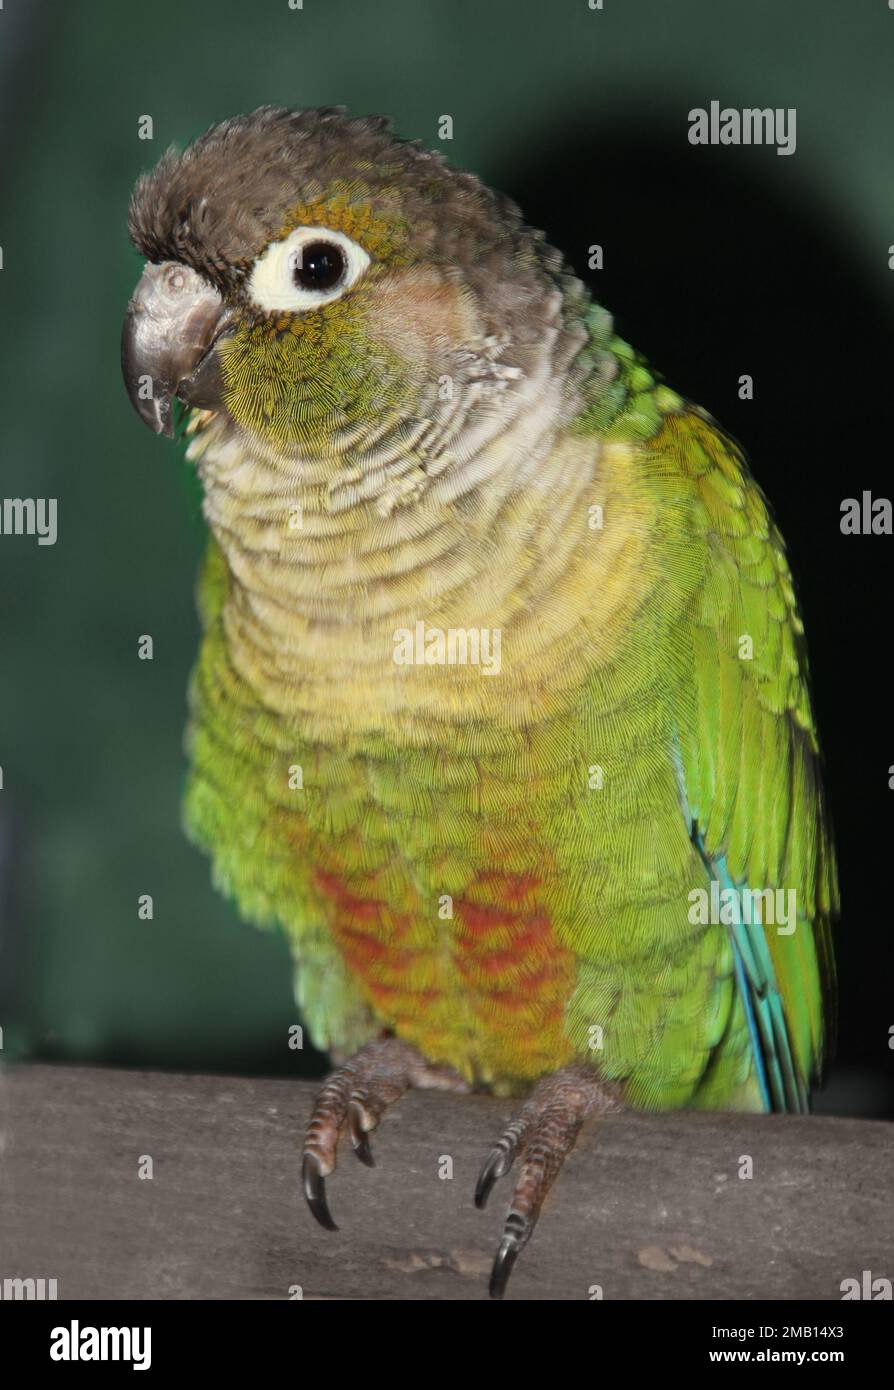 A portrait of a green cheek conure perched on a wooden stick. You see the belly of the bird and one eye. He looks very cute and friendly Stock Photo